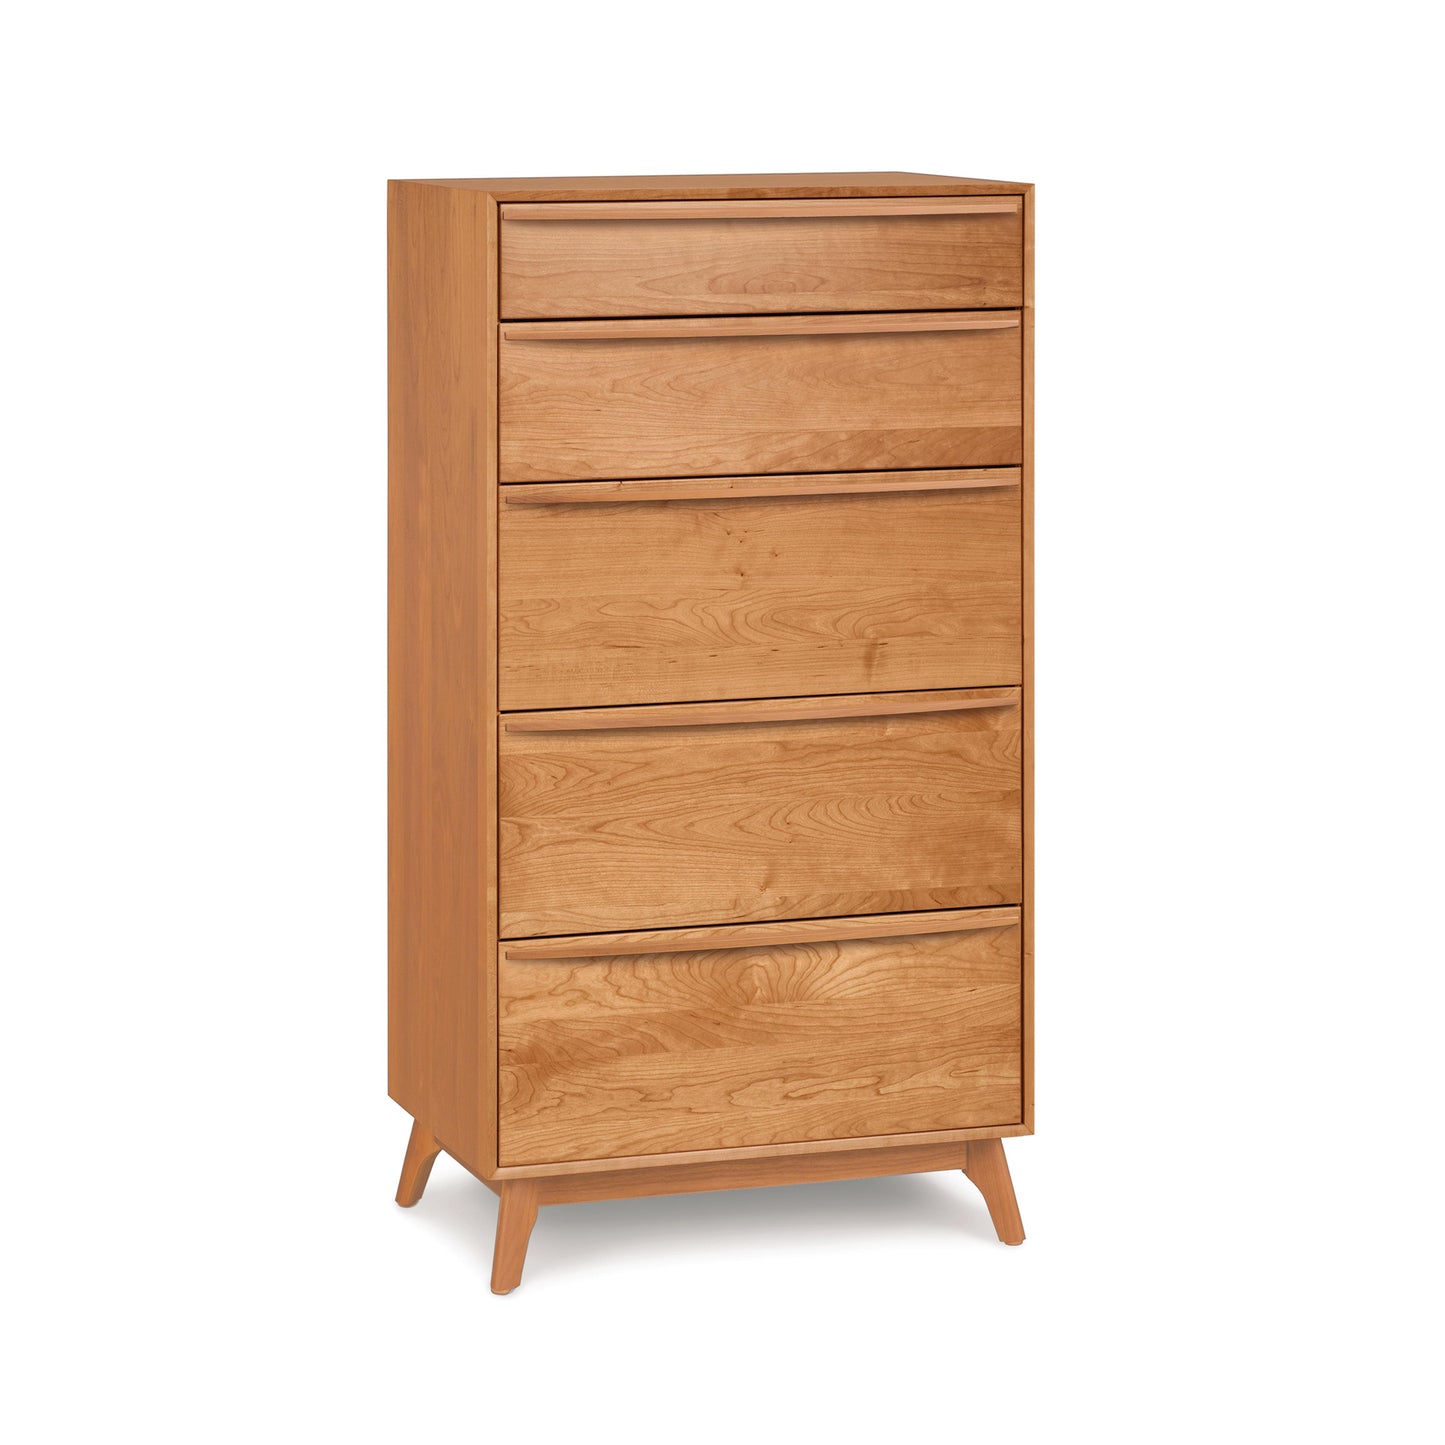 A Catalina 5-Drawer Chest from Copeland Furniture on a white background.